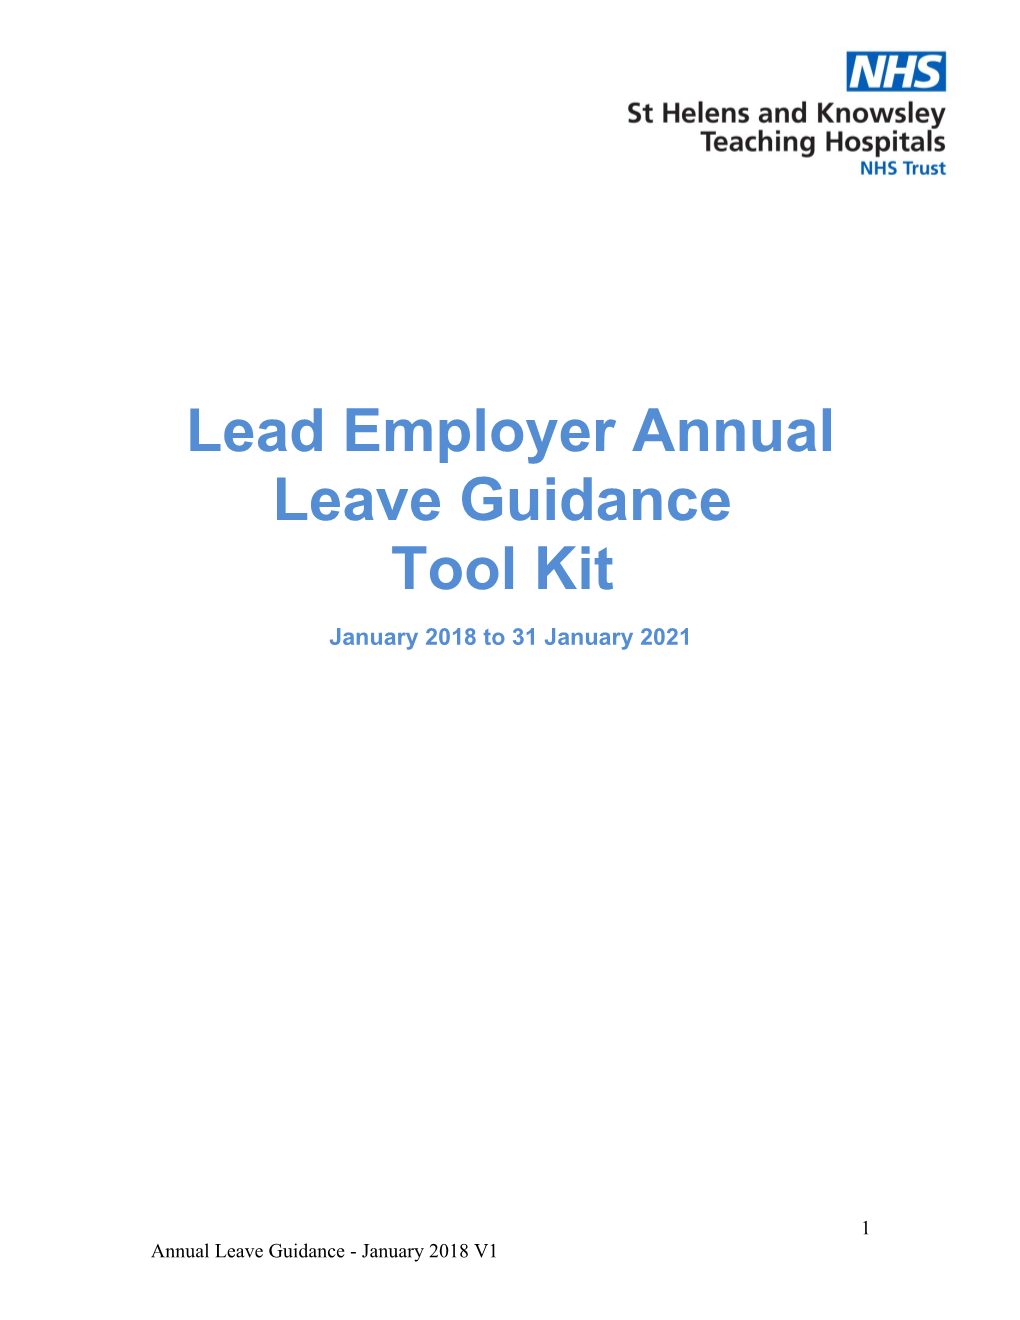 Lead Employer Annual Leave Guidance